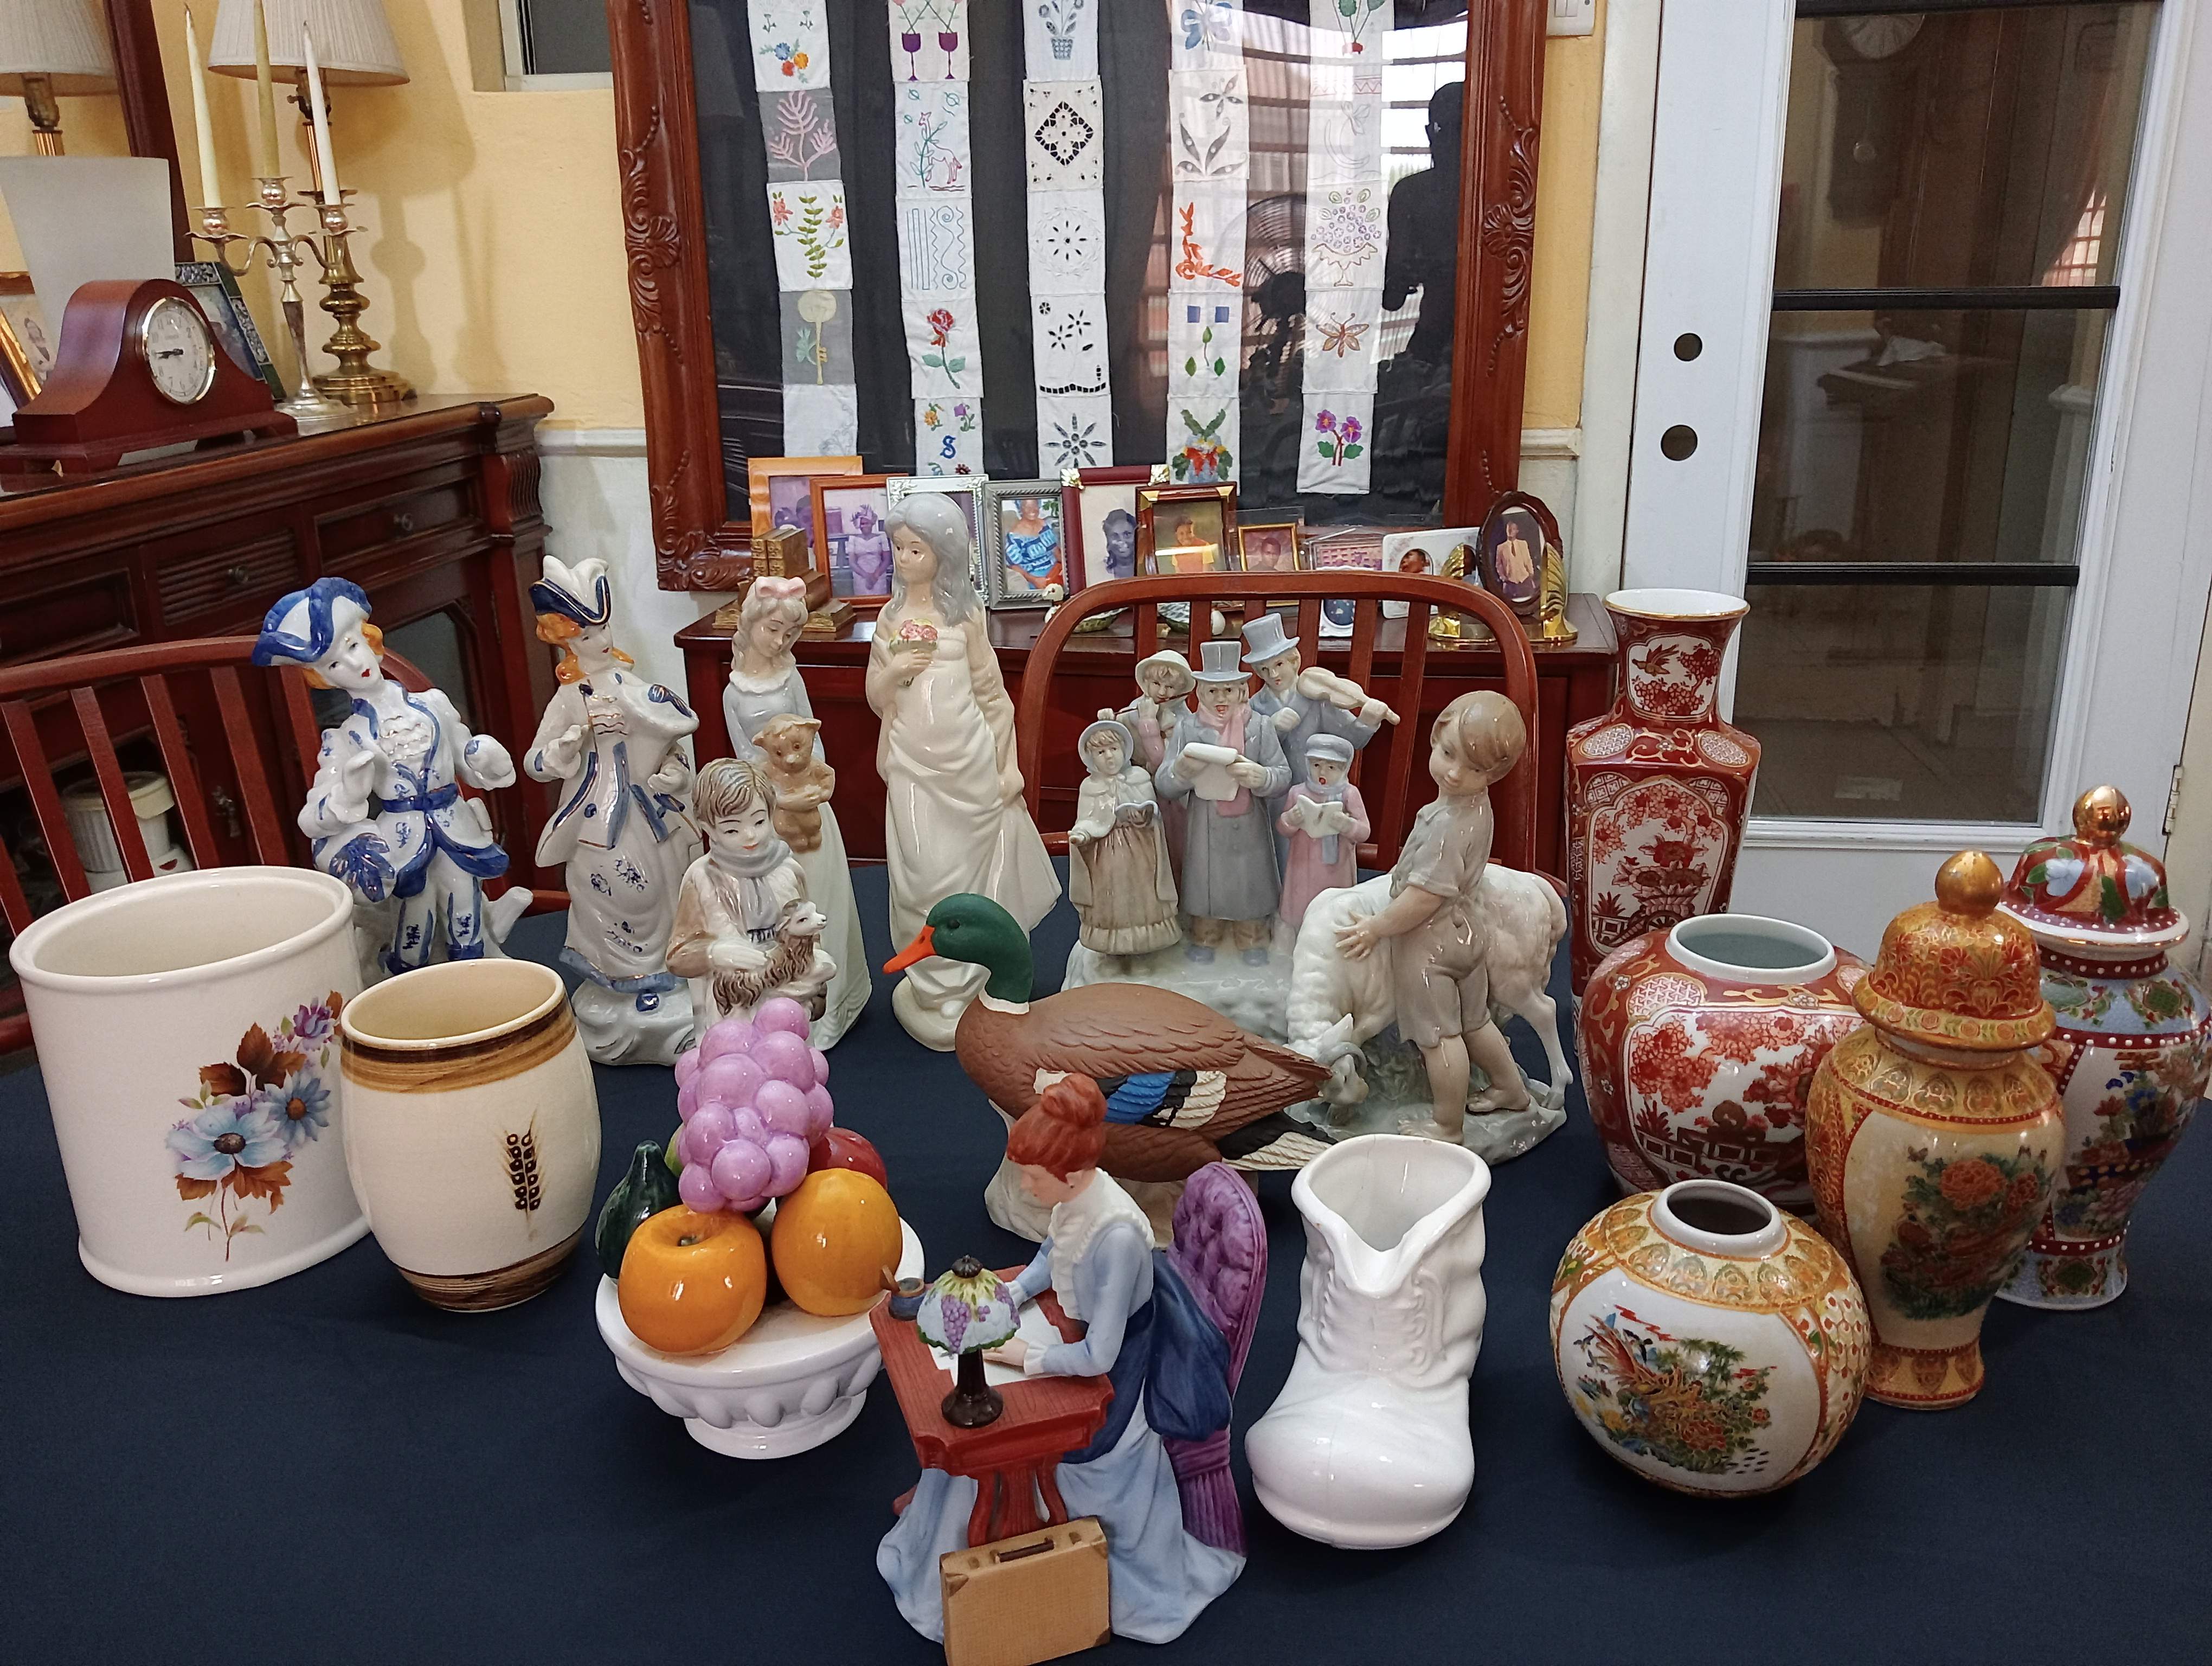 High quality Bone China figurines and objects. Also a good number of Imari Japanese porcelain.